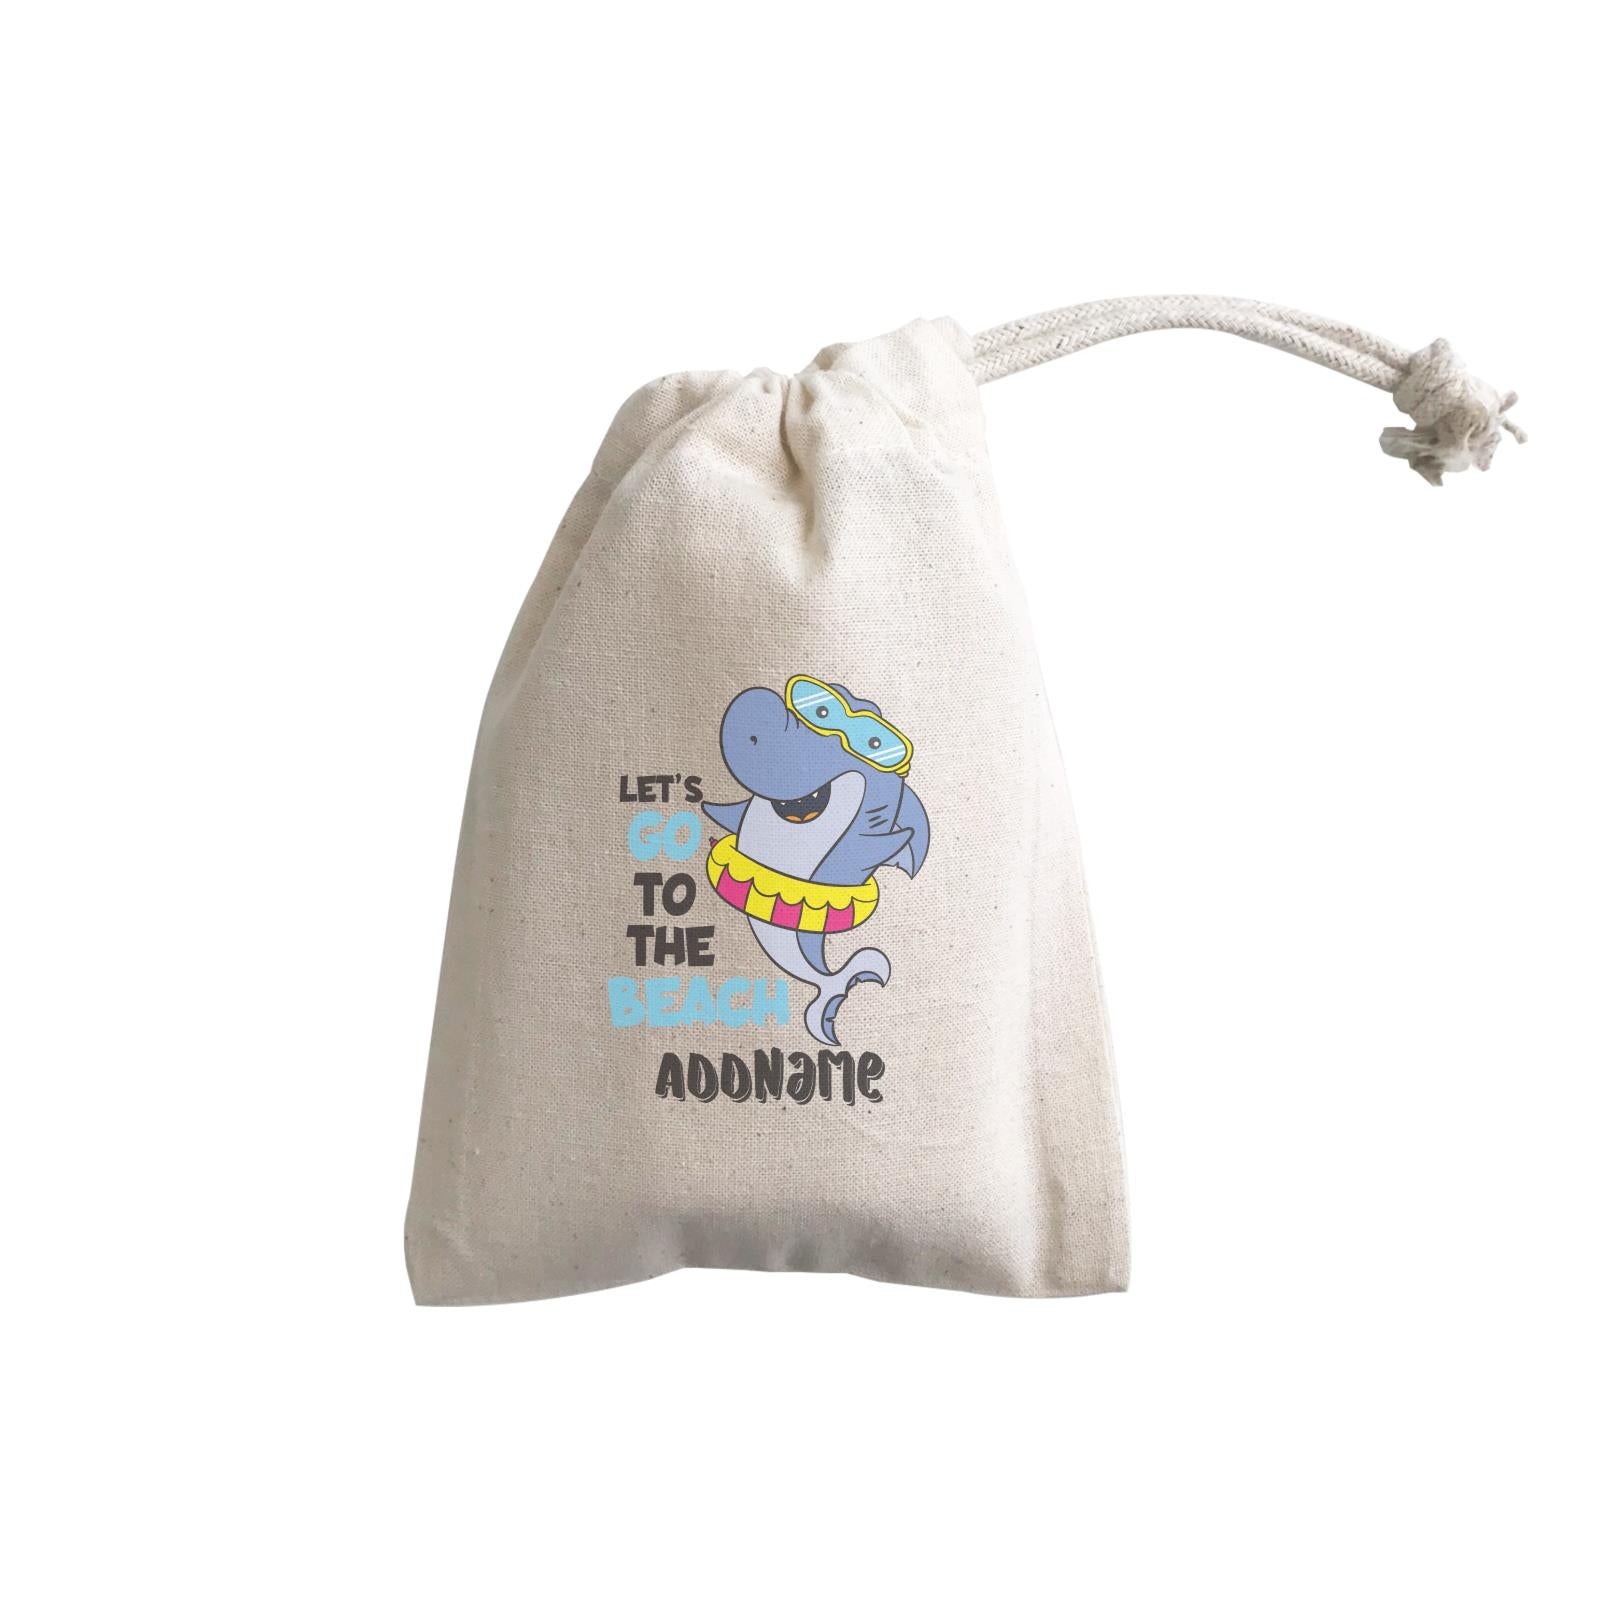 Cool Cute Sea Animals Let's Go To The Beach Addname GP Gift Pouch